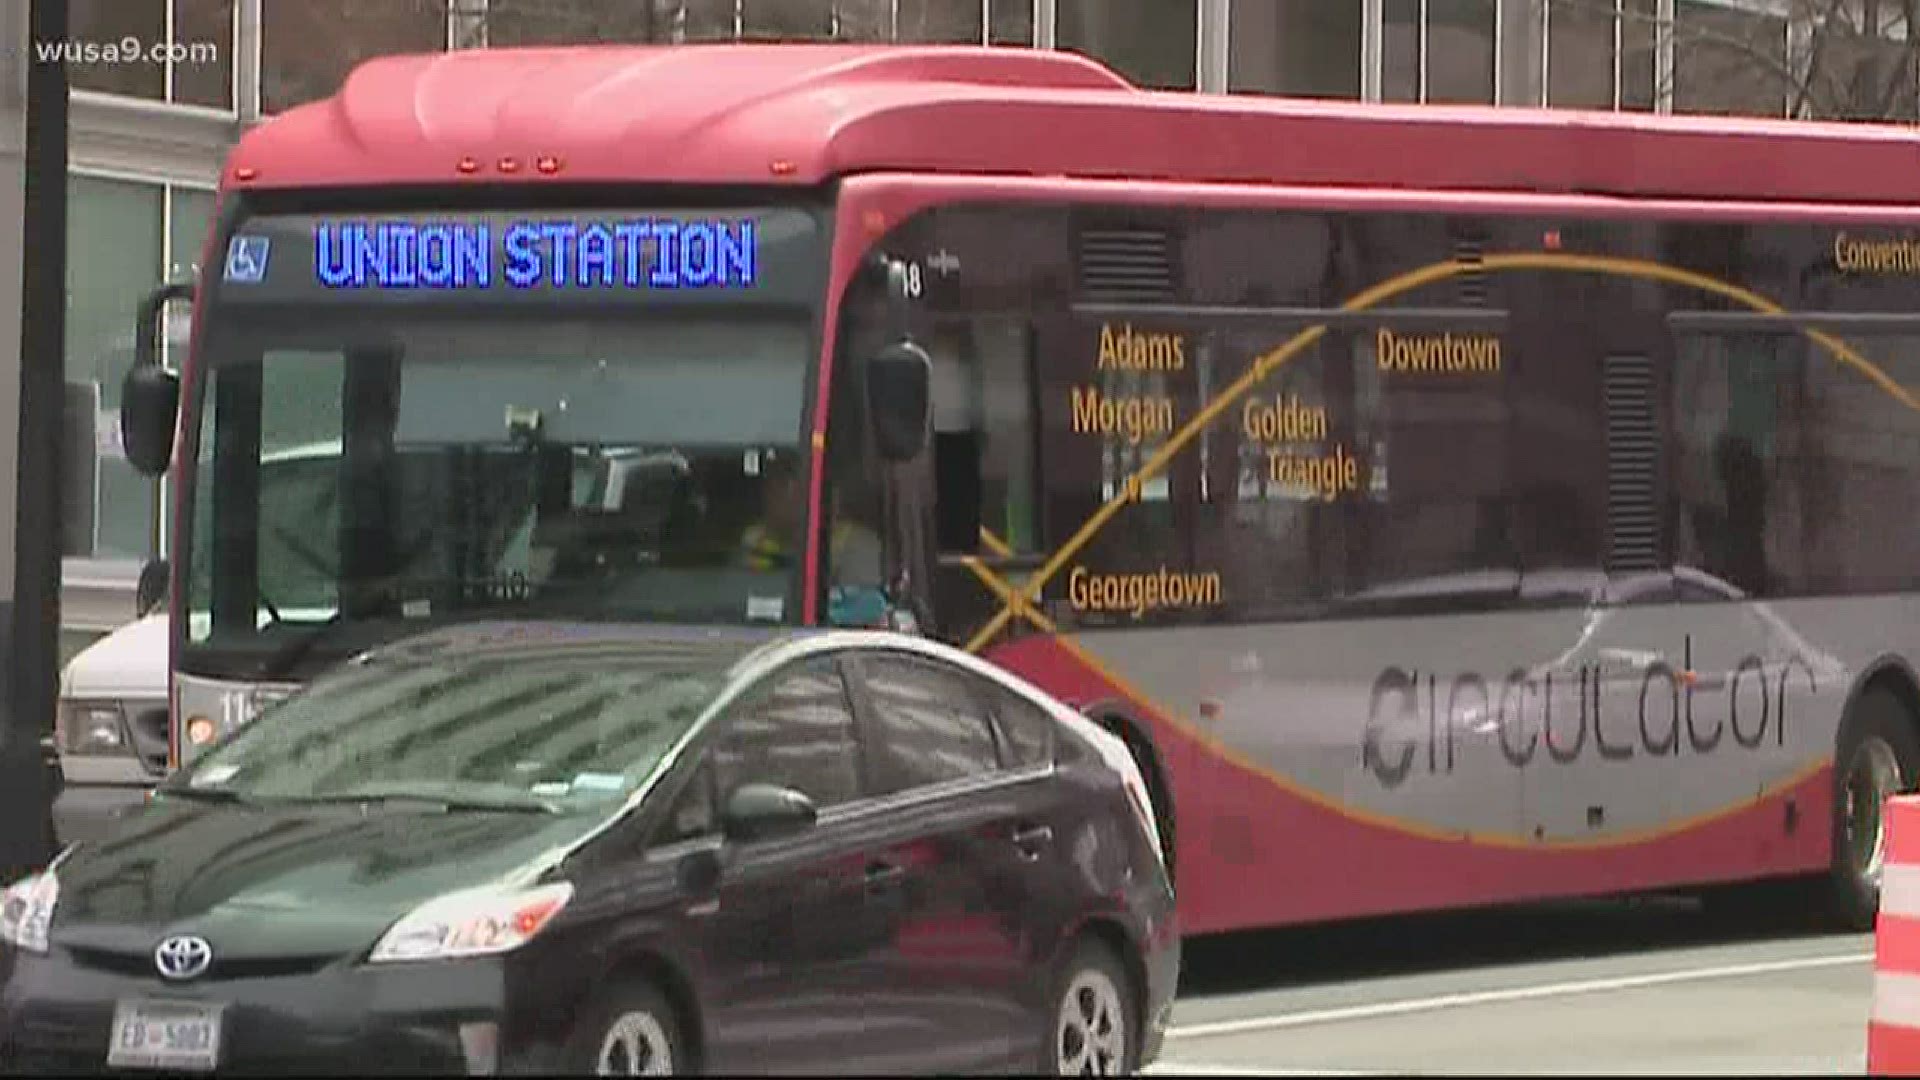 After two D.C. Circulator employees test positive for COVID-19, a driver says she is concerned for her safety.